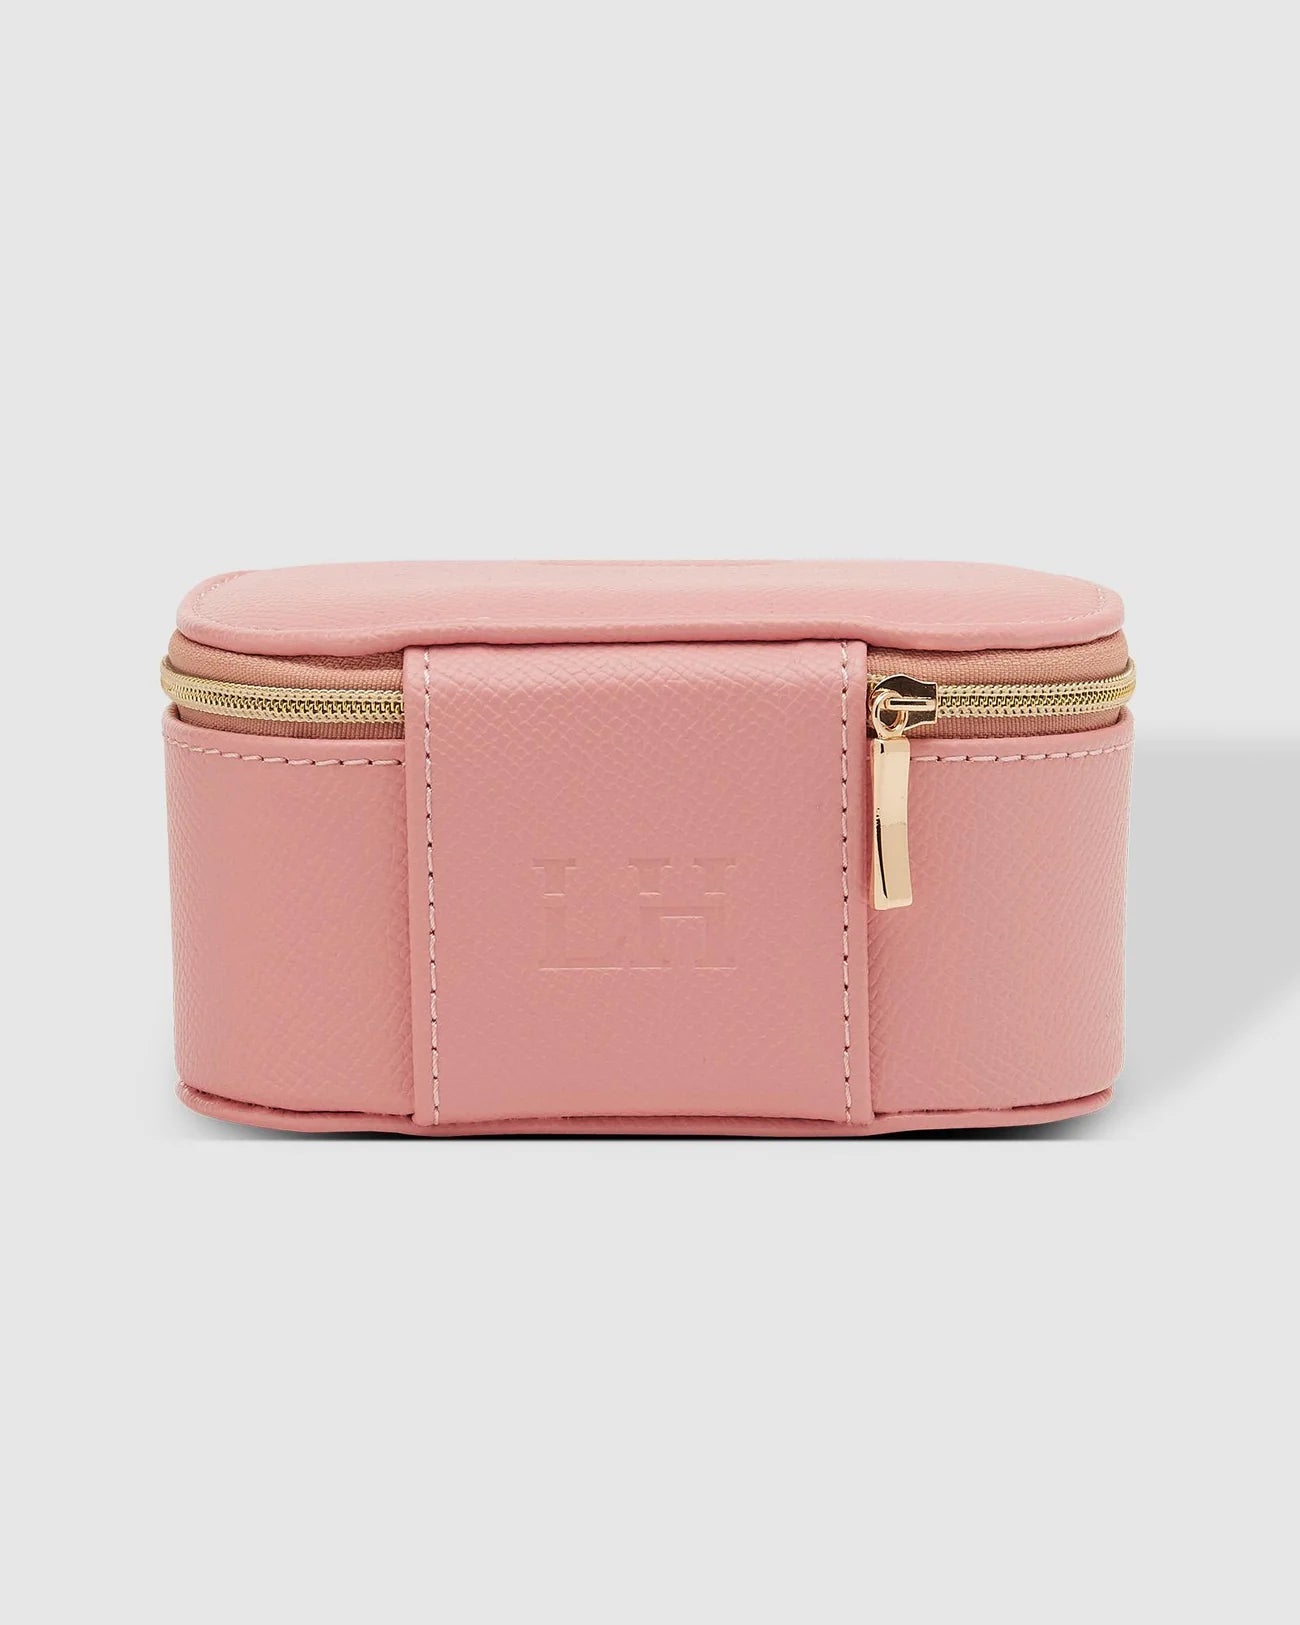 Olive Jewellery Box (Pink) - Something For Me​​